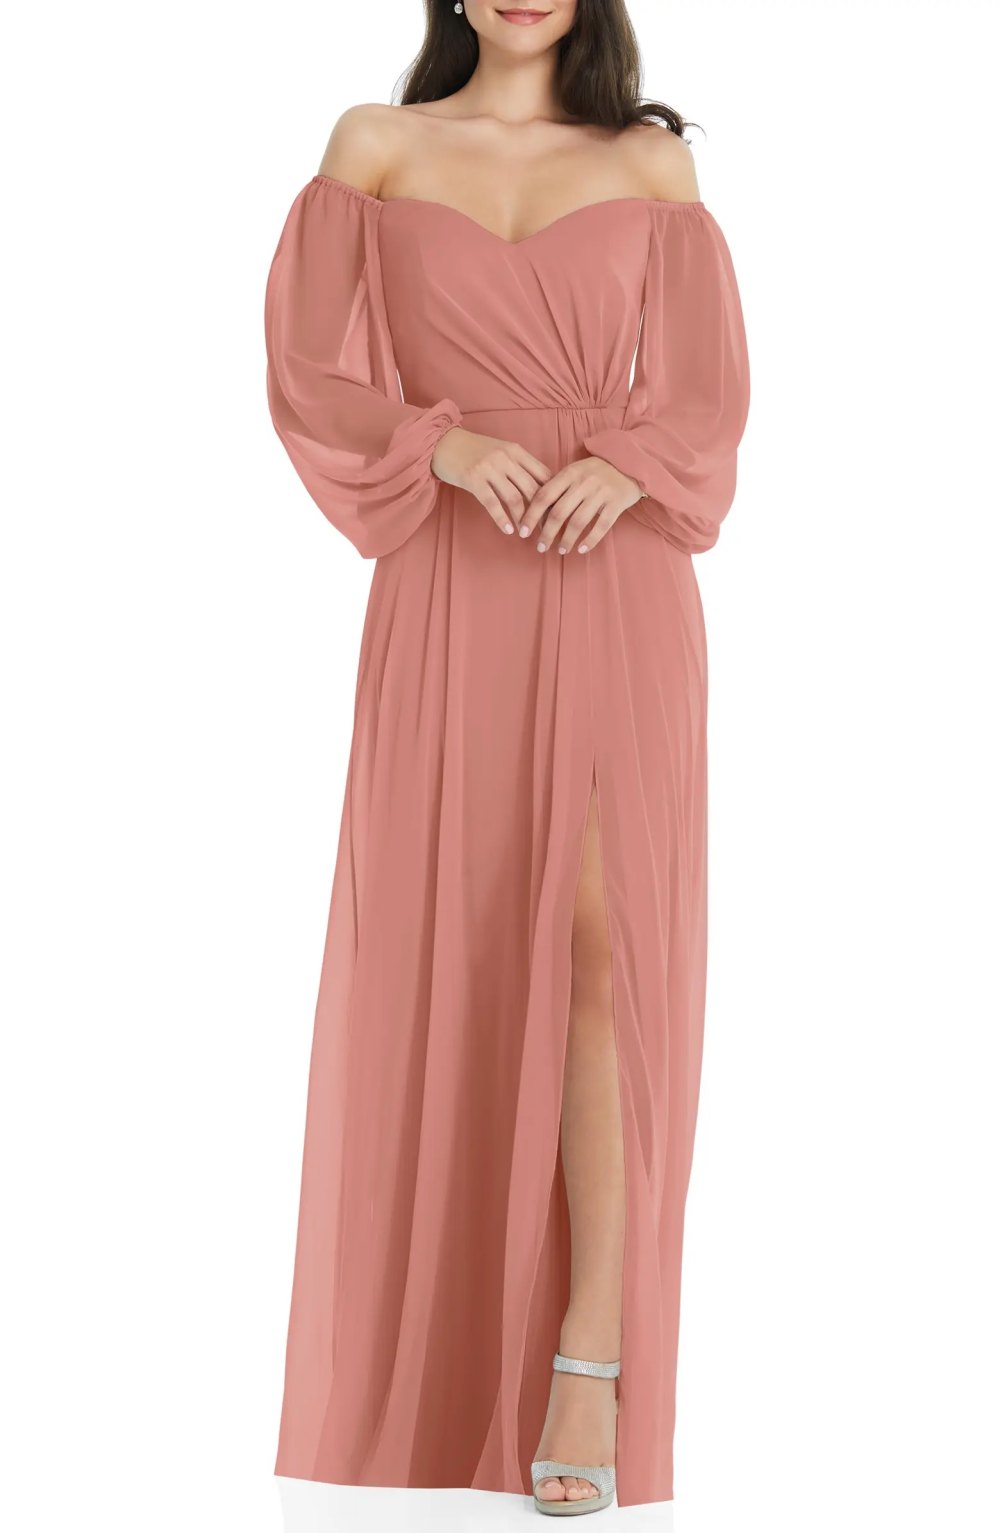 Dessy Collection Convertible Neck Long Sleeve Chiffon Gown